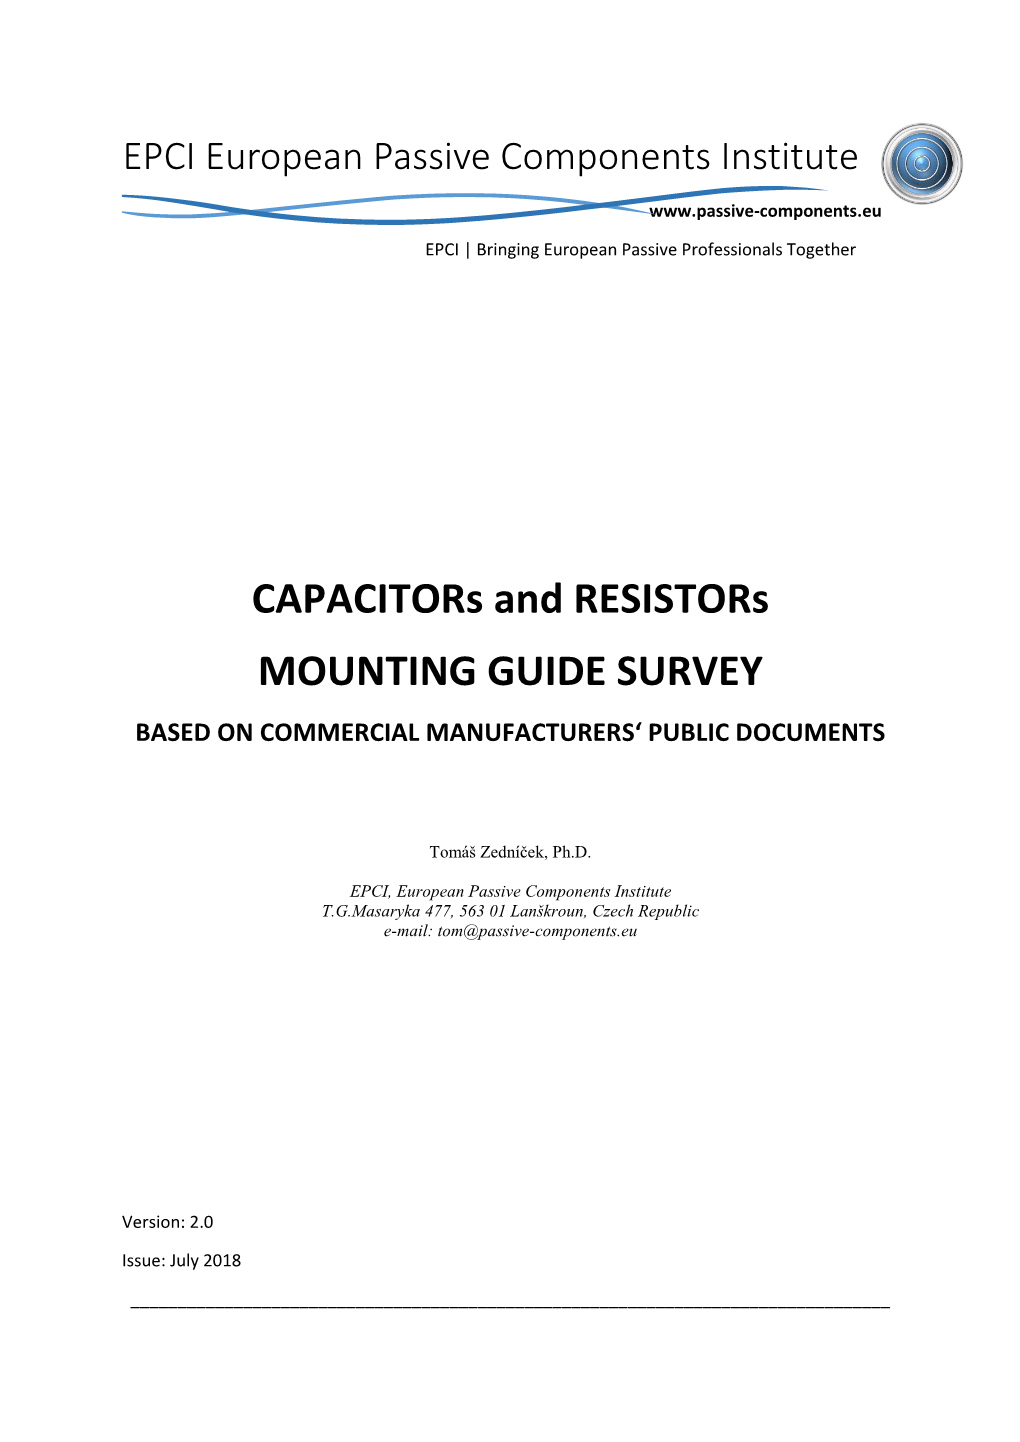 Capacitors and Resistors MOUNTING GUIDE SURVEY BASED on COMMERCIAL MANUFACTURERS‘ PUBLIC DOCUMENTS